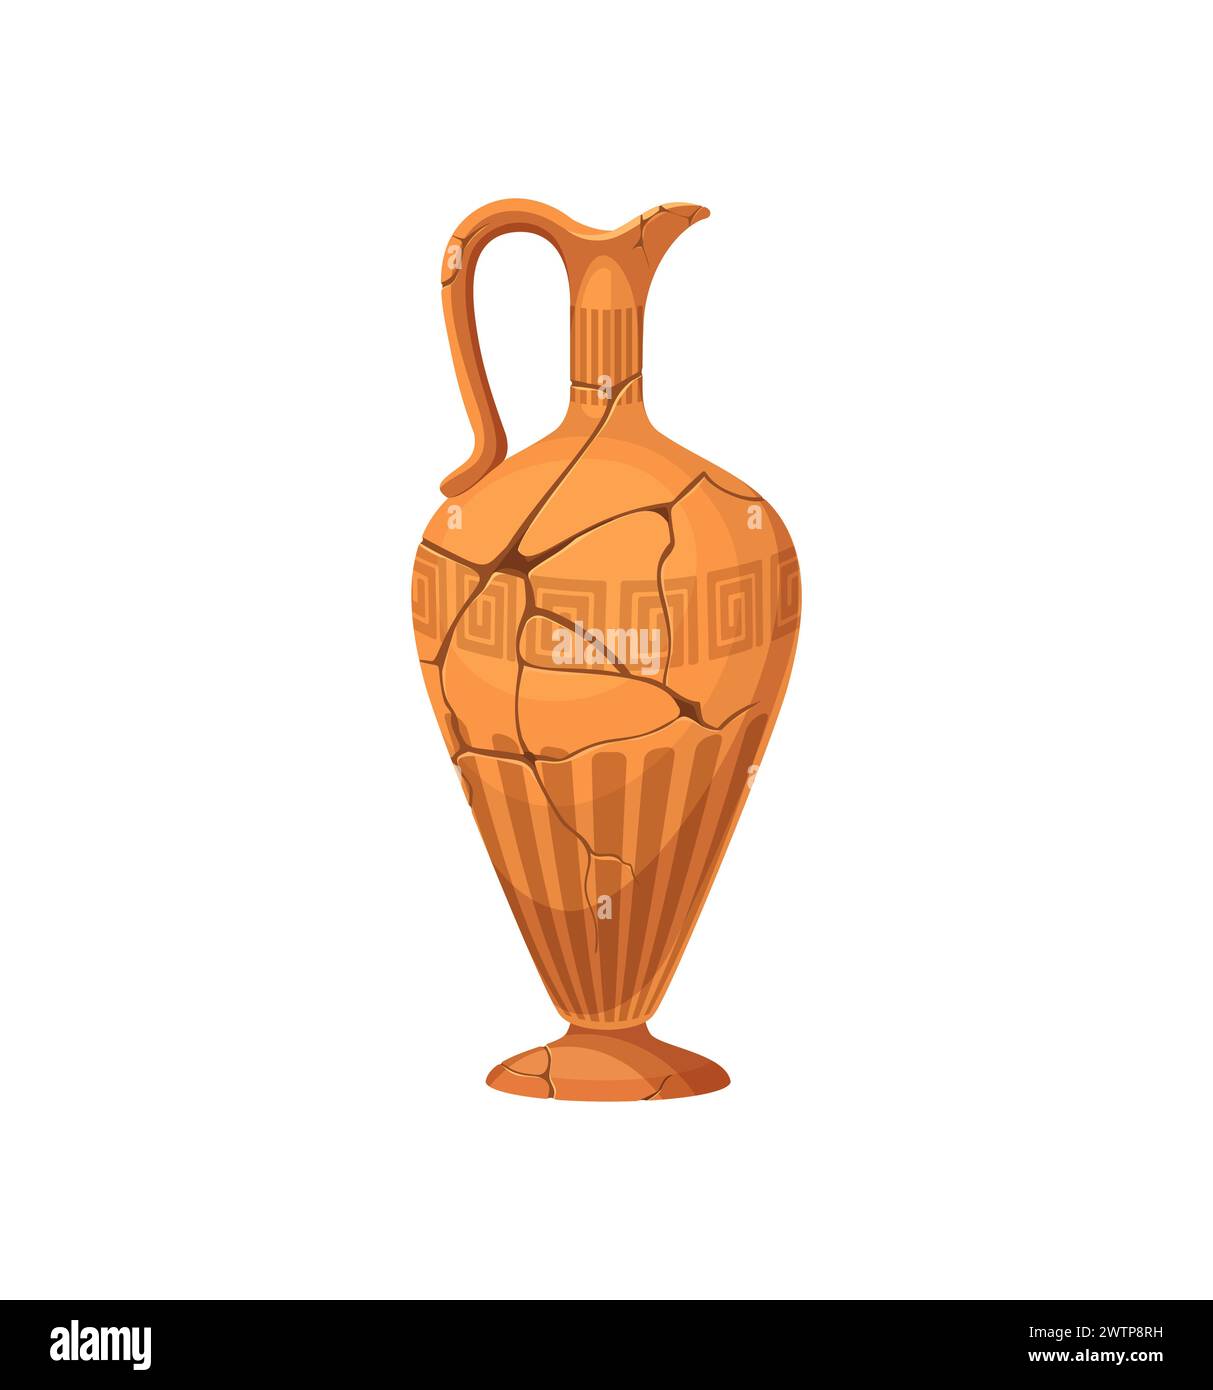 Ancient broken vase and pottery. Old ceramic cracked pot or jug. Isolated cartoon vector earthenware pitcher. Vessel for wine or oil, museum artefact with cracks, greek or roman pattern and handle Stock Vector